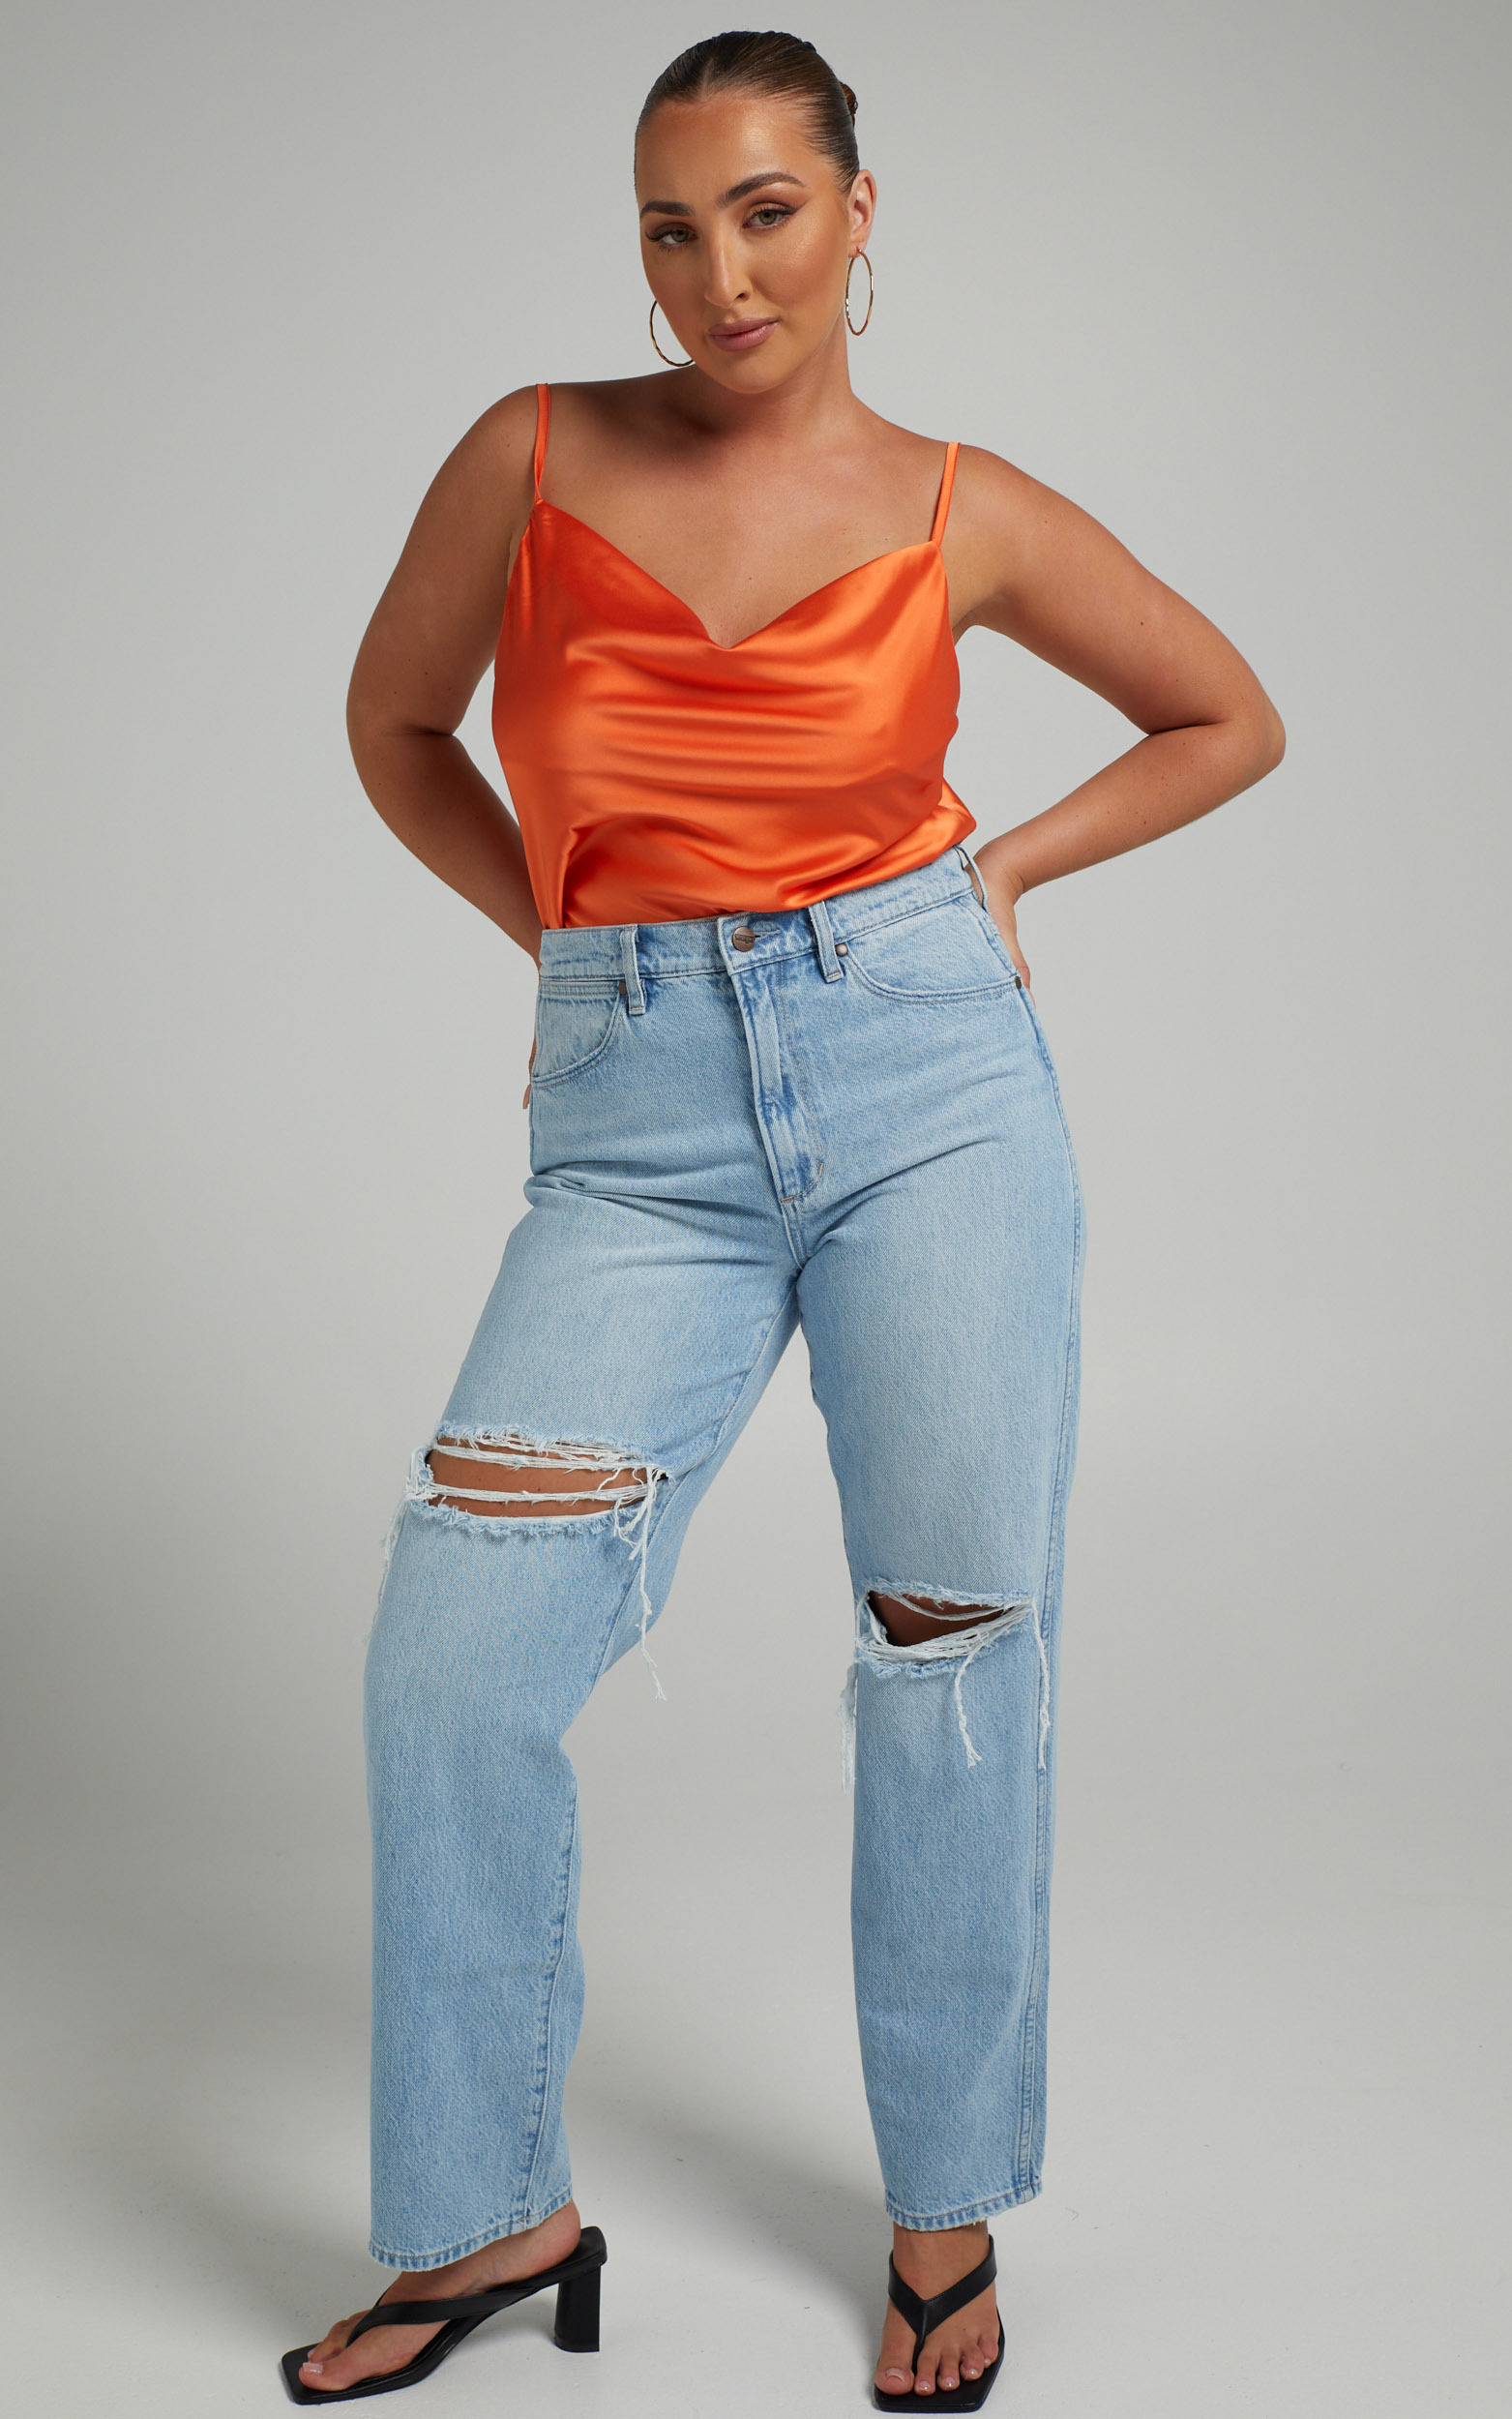 Faunia Straight Line Cowl Neck Top in Orange - 04, ORG3, hi-res image number null